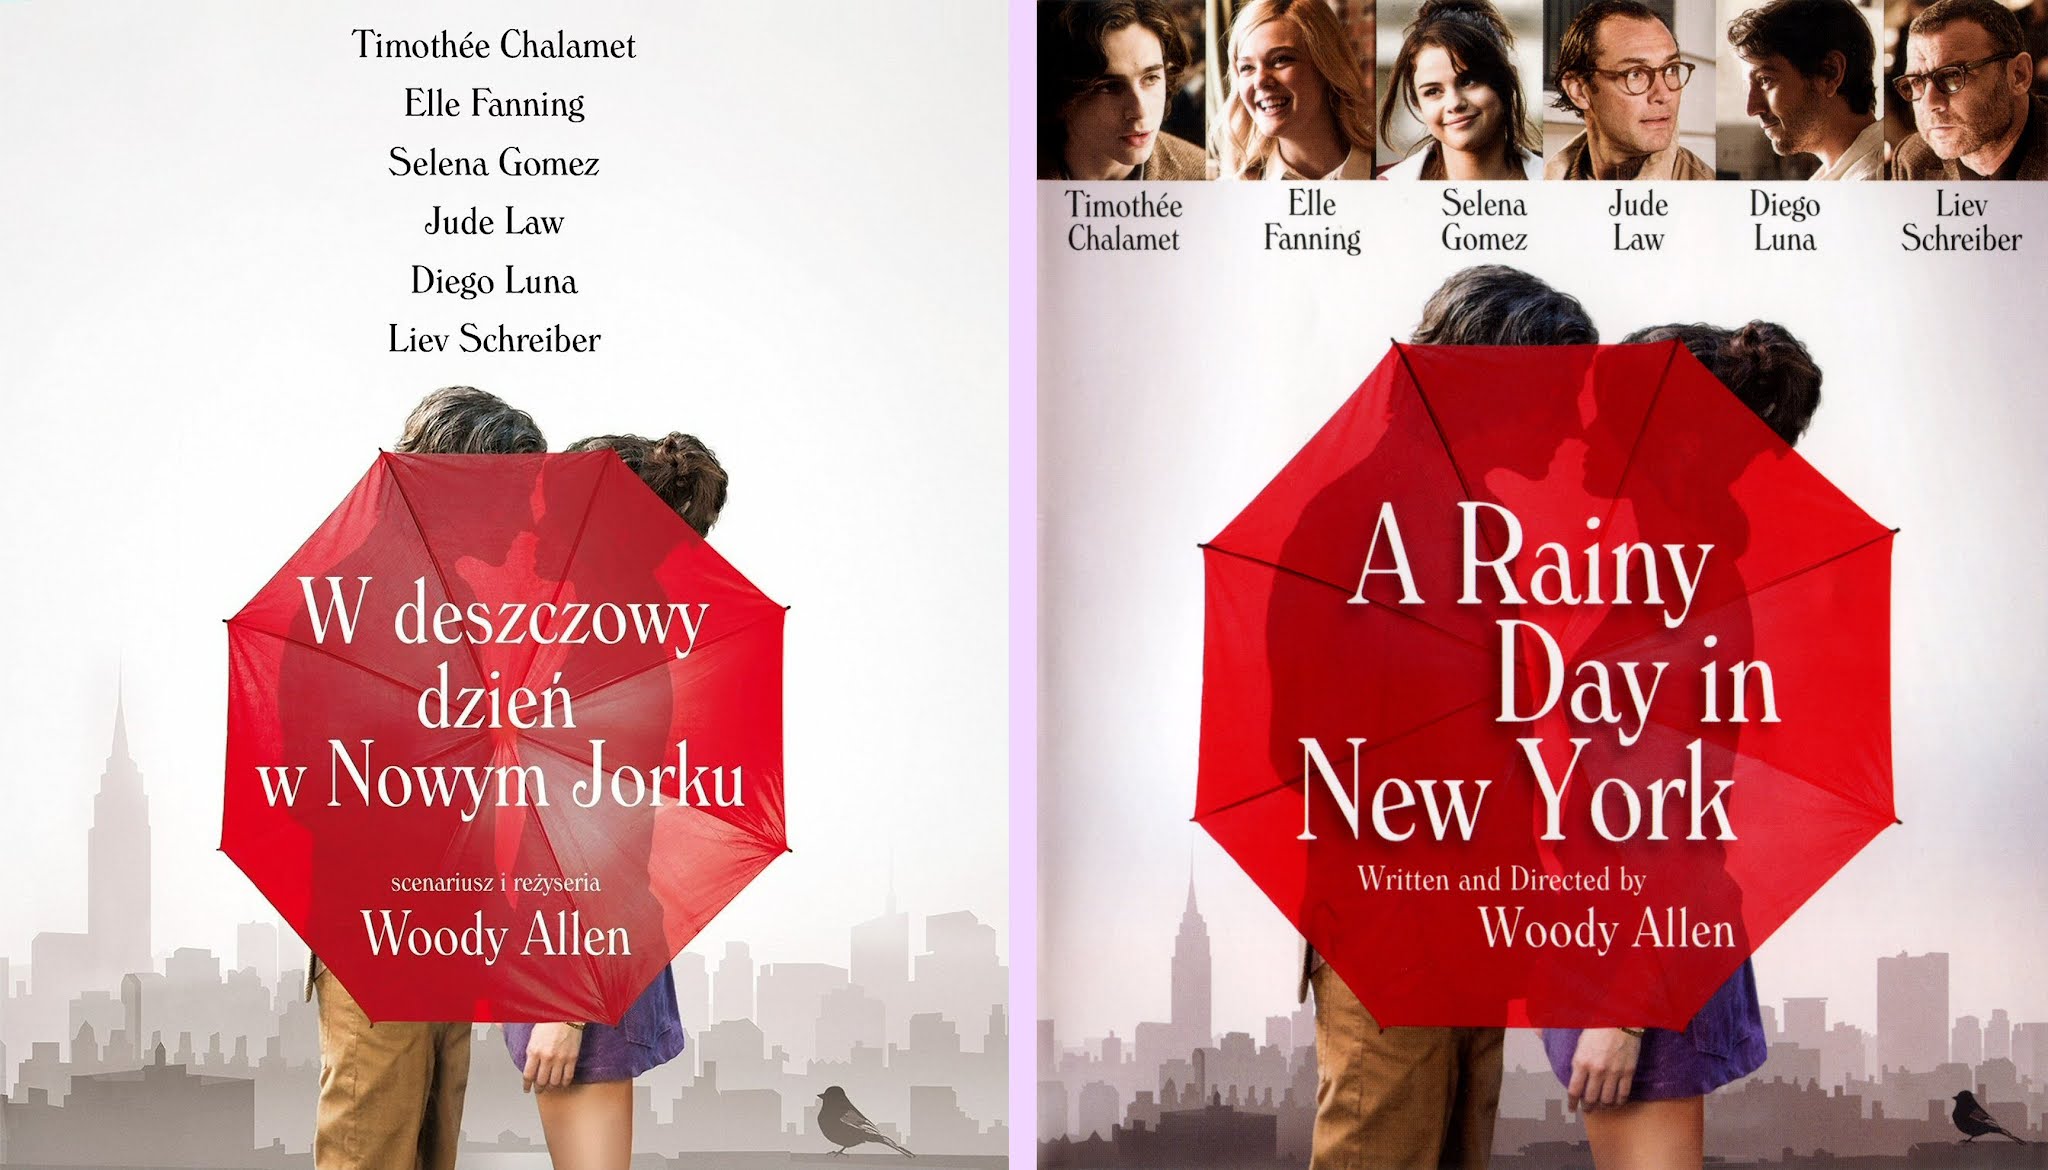 A Rainy Day in New York (2019) directed by Woody Allen • Reviews